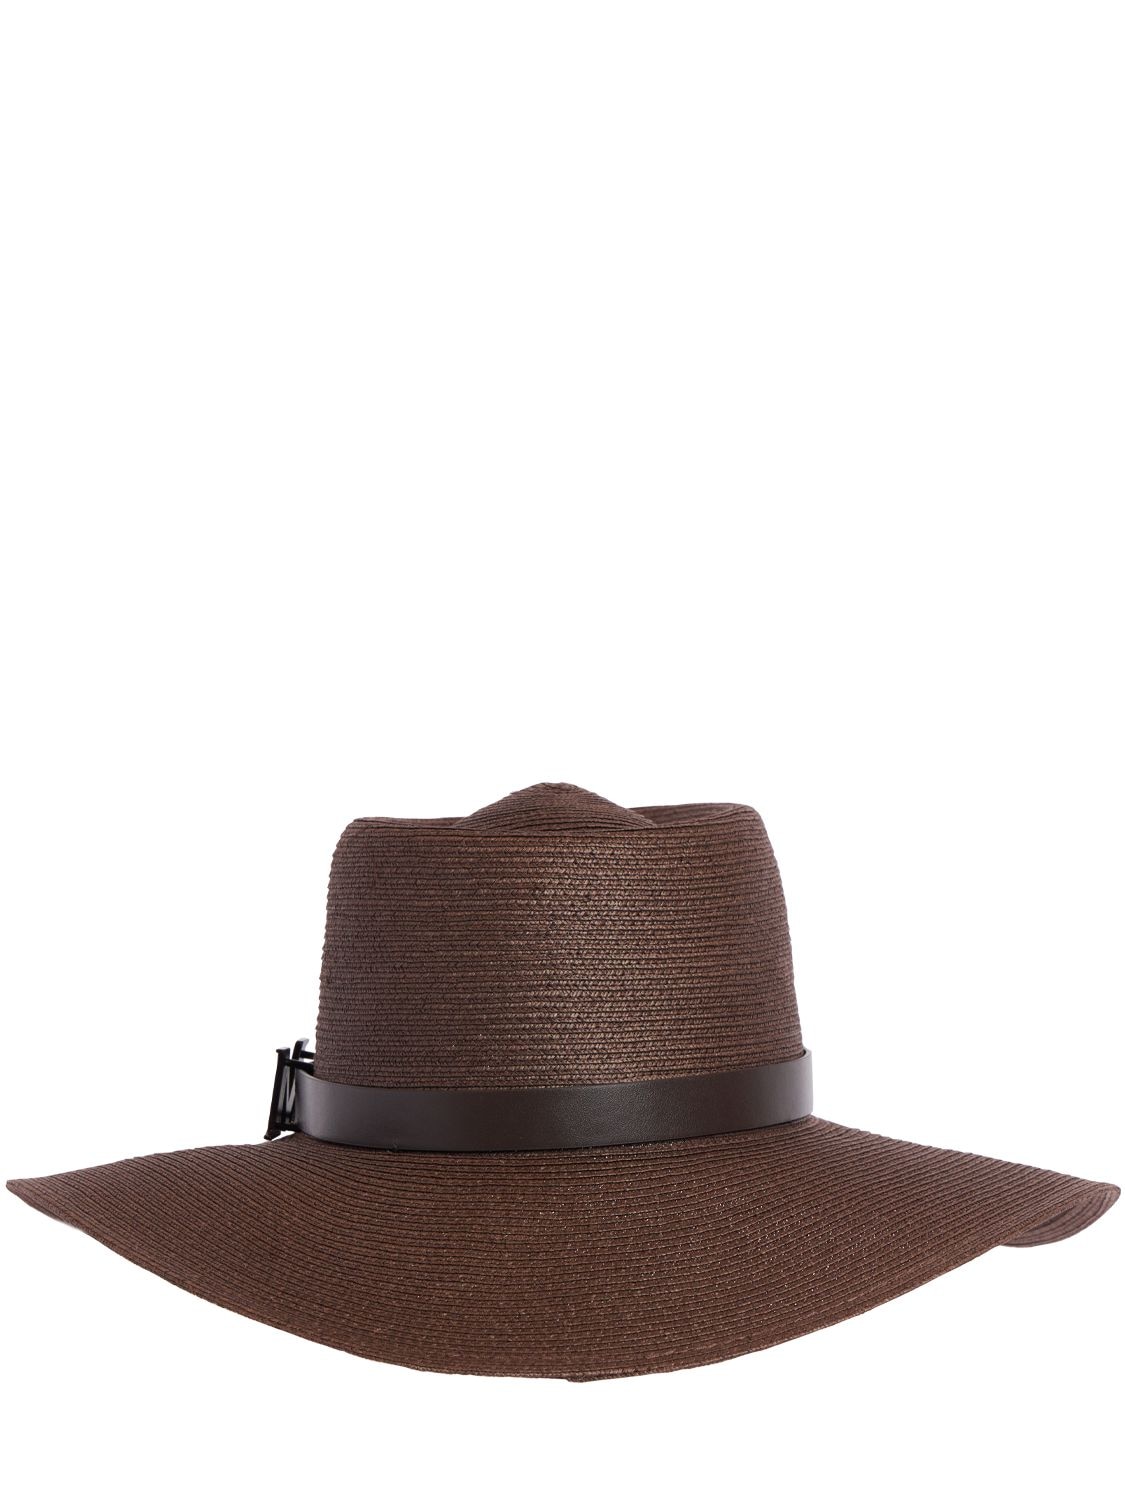 Image of Musette Straw Brimmed Hat